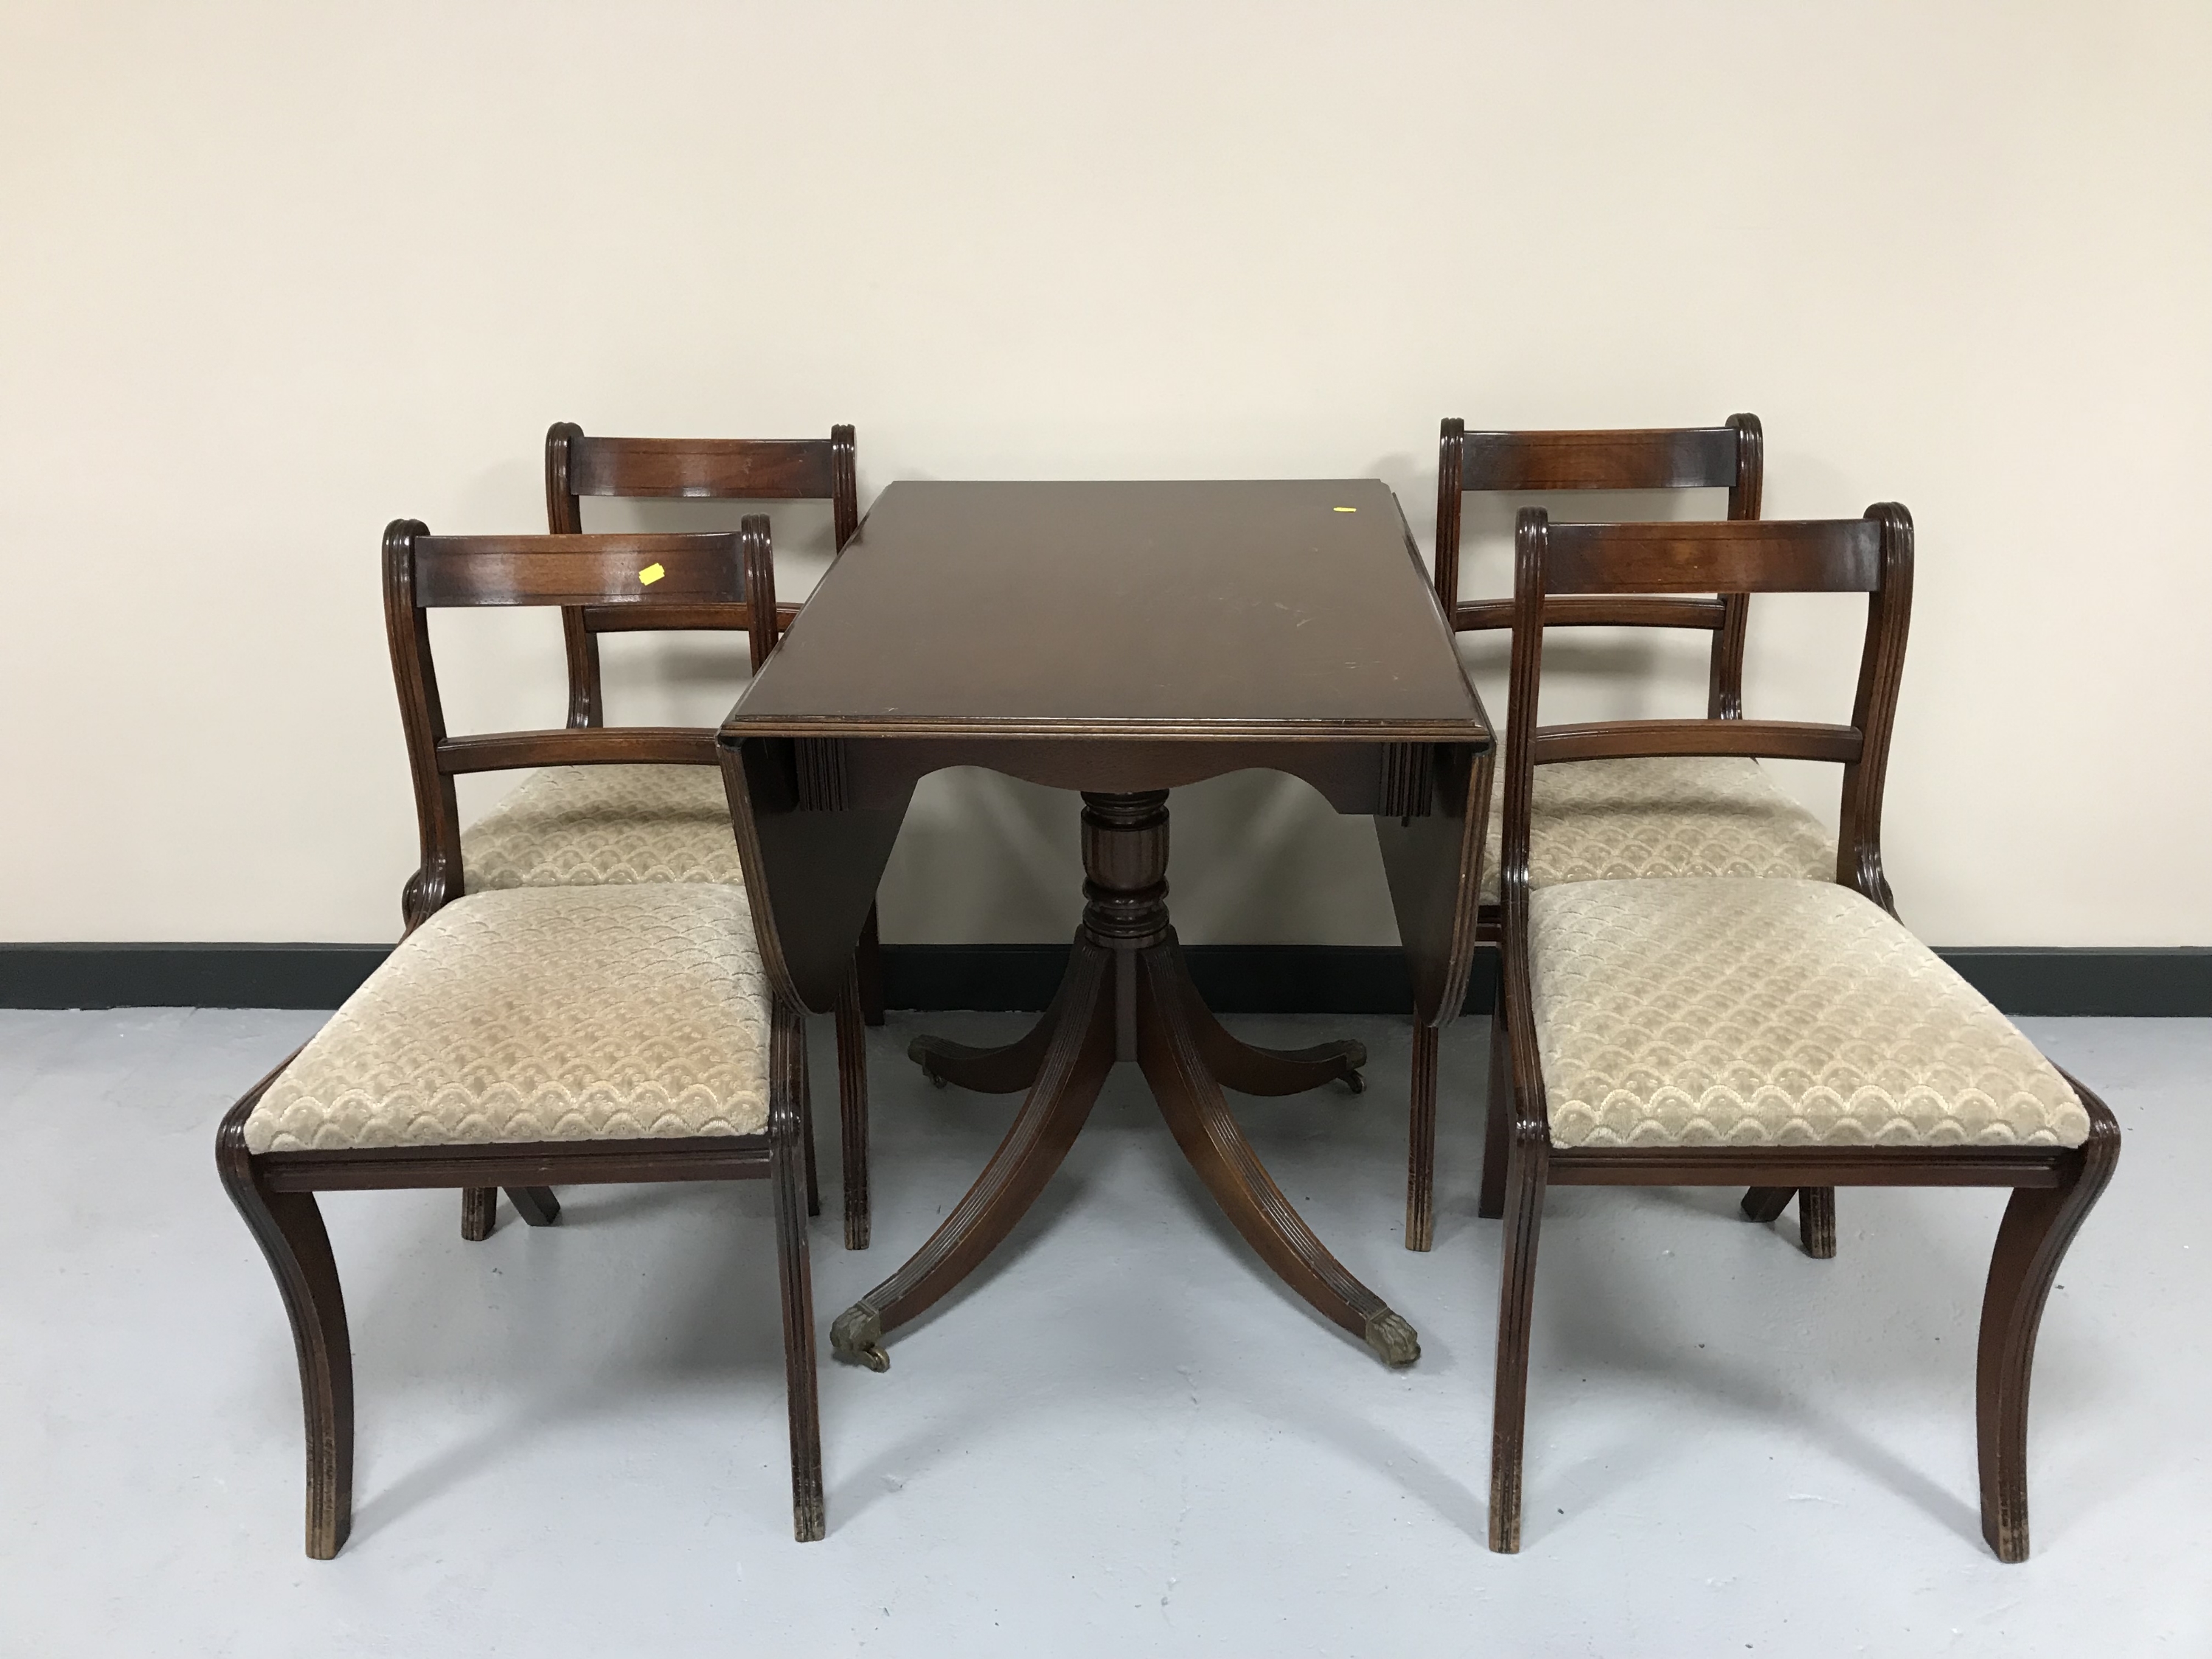 A mahogany drop leaf pedestal table and four chairs